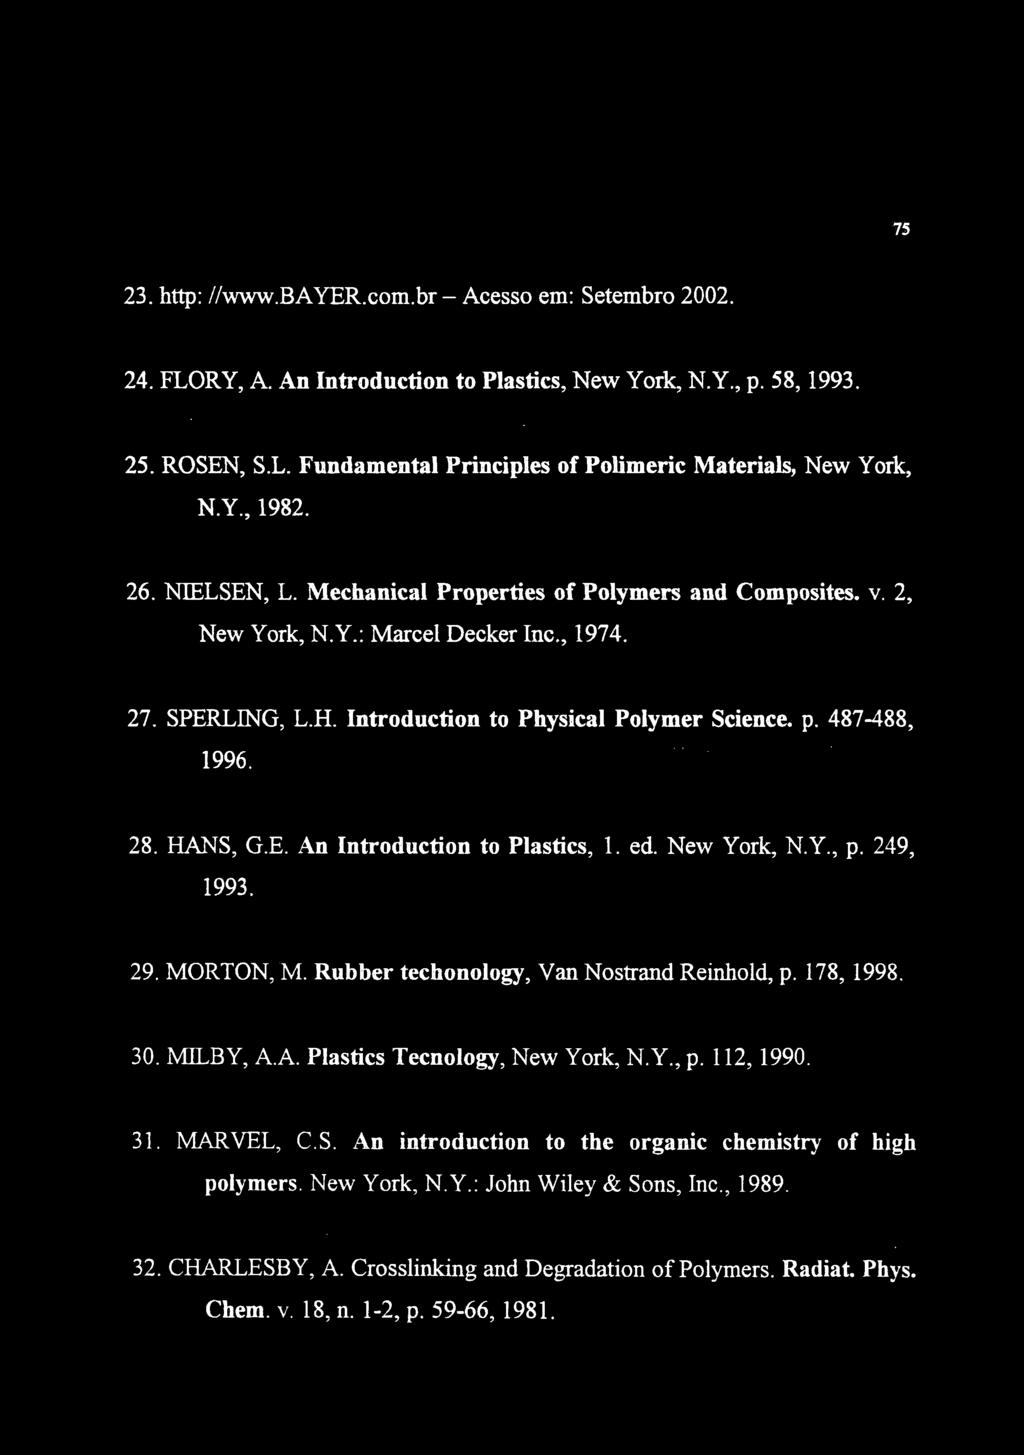 75 23. http: //www.bayer.com.br - Acesso em: Setembro 2002. 24. FLORY, A. An Introduction to Plastics, New York, N.Y., p. 58,1993. 25. ROSEN, S.L. Fundamental Principies of Polimeric Materials, New York, N.